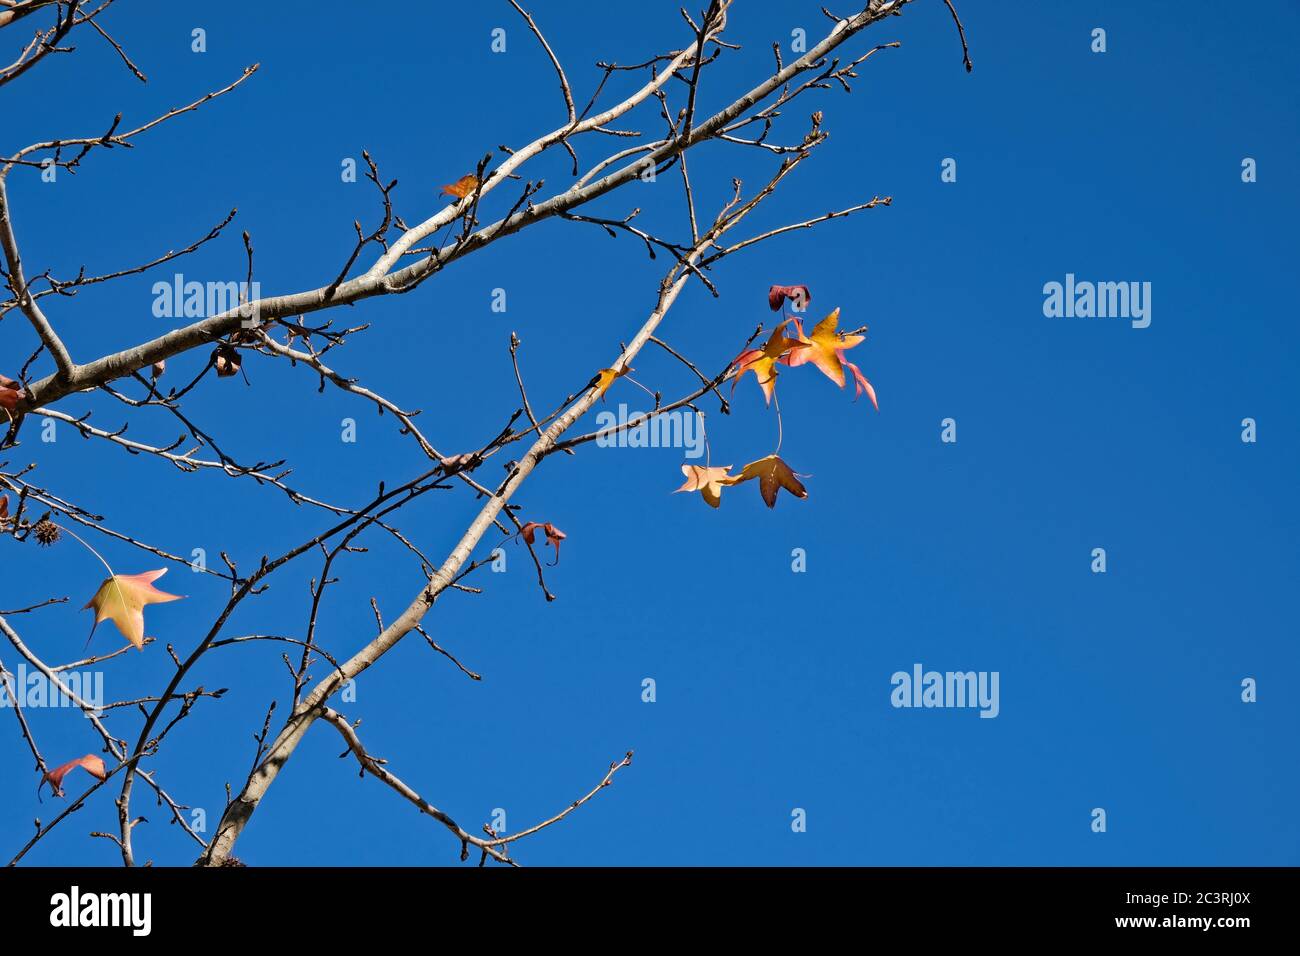 Liquidambar tree branches with a few leaves, in Autumn or Fall, against a bright blue clear sky. Stock Photo